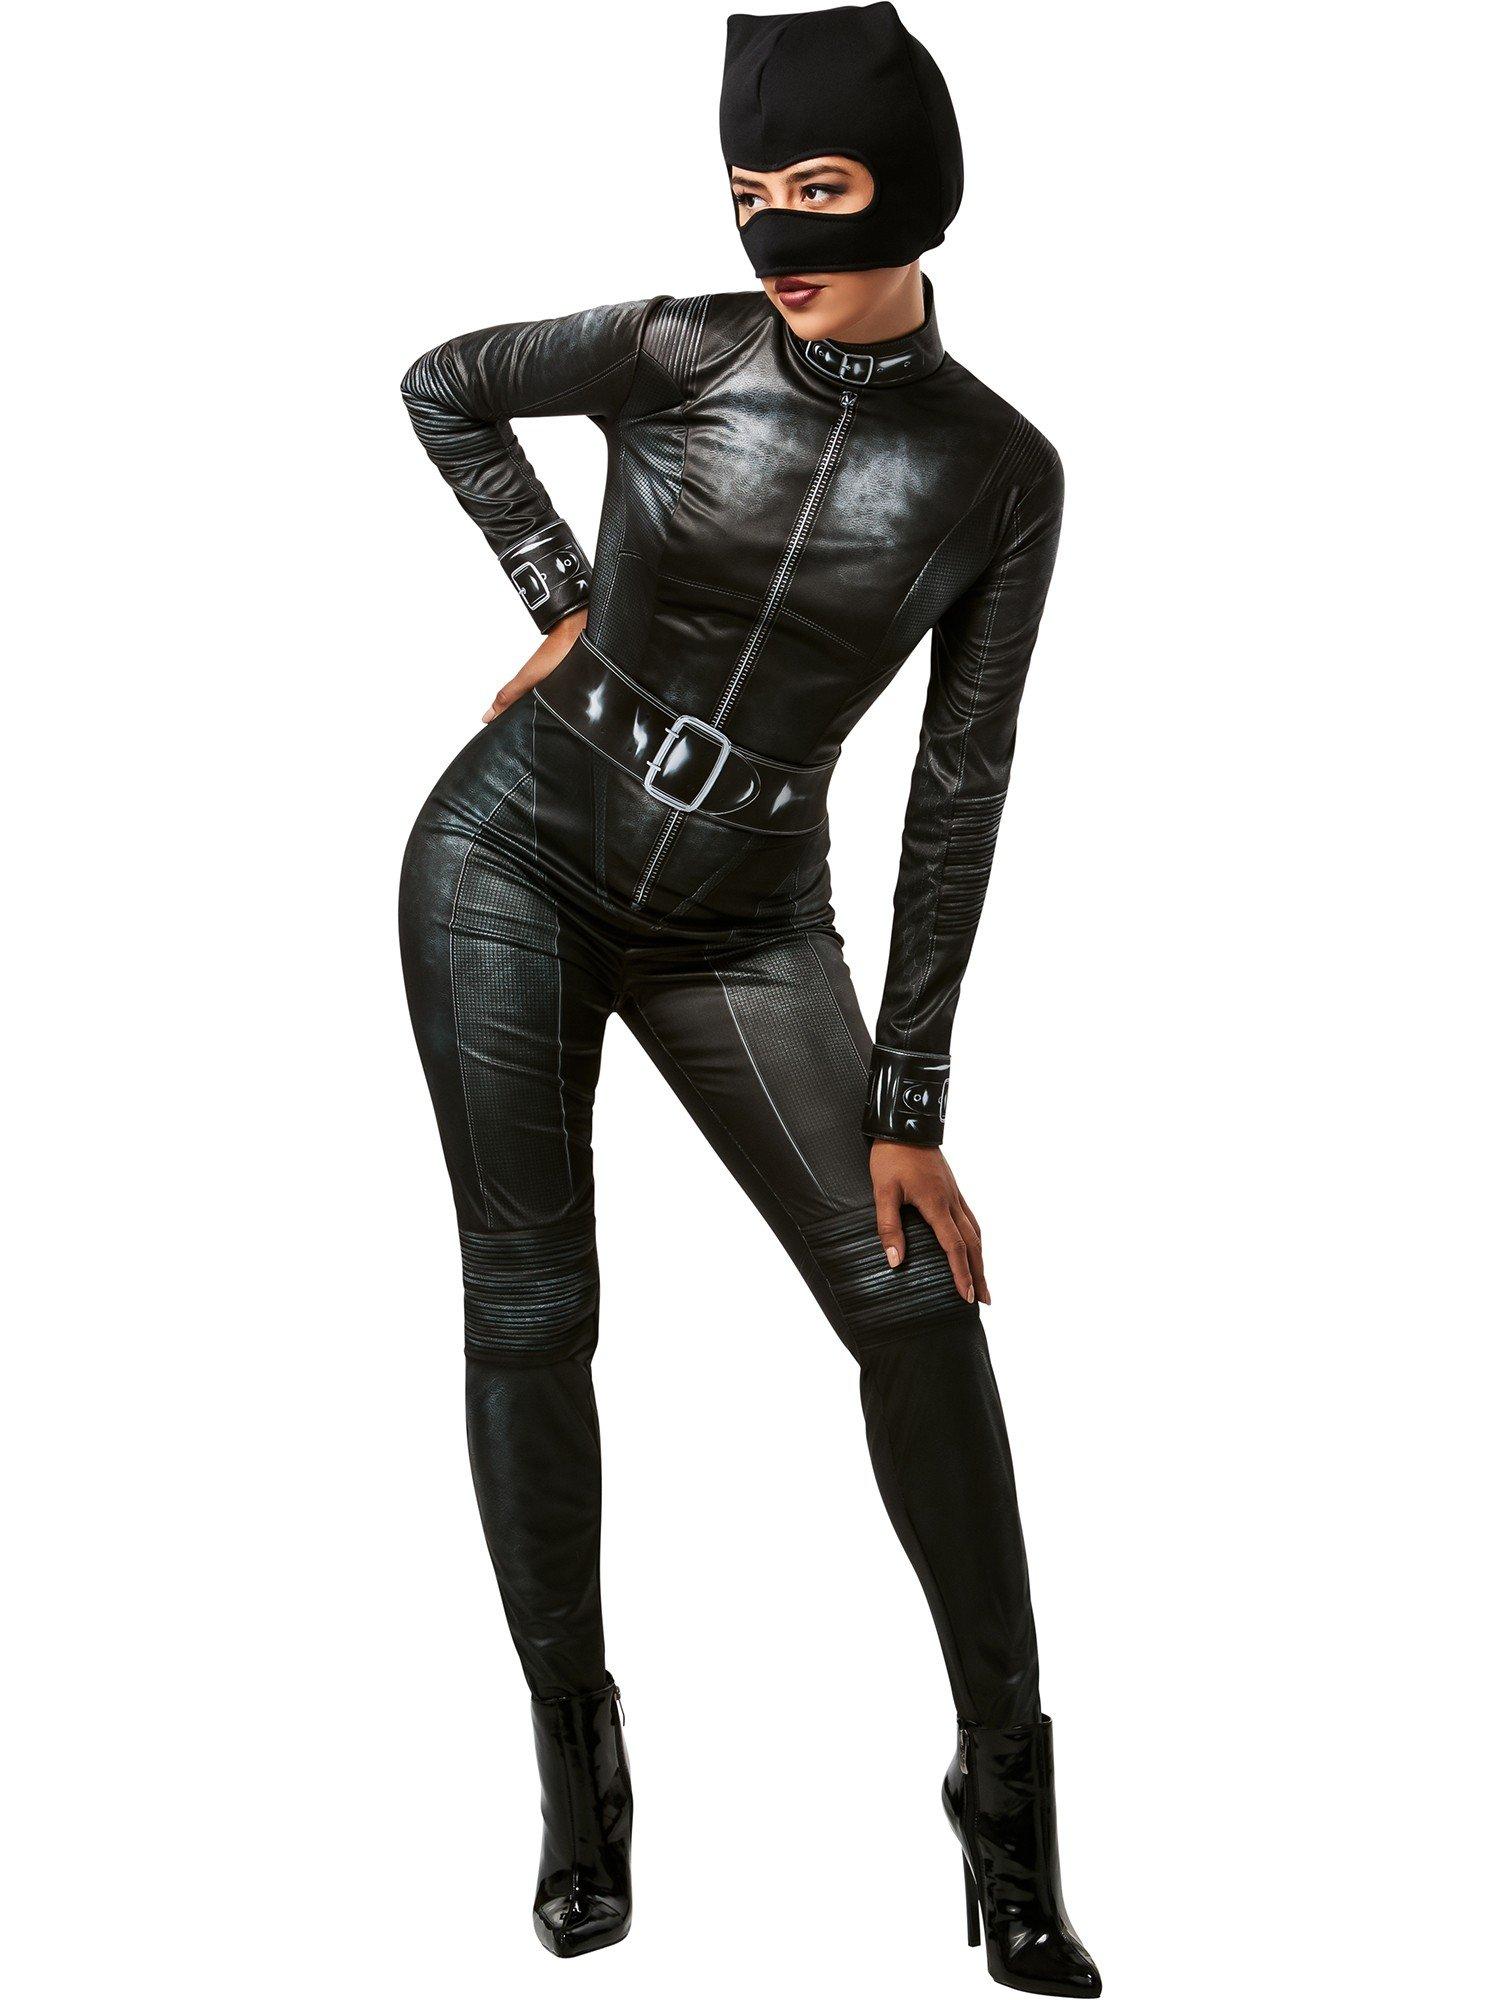 Catwoman Costume For Kids | tunersread.com